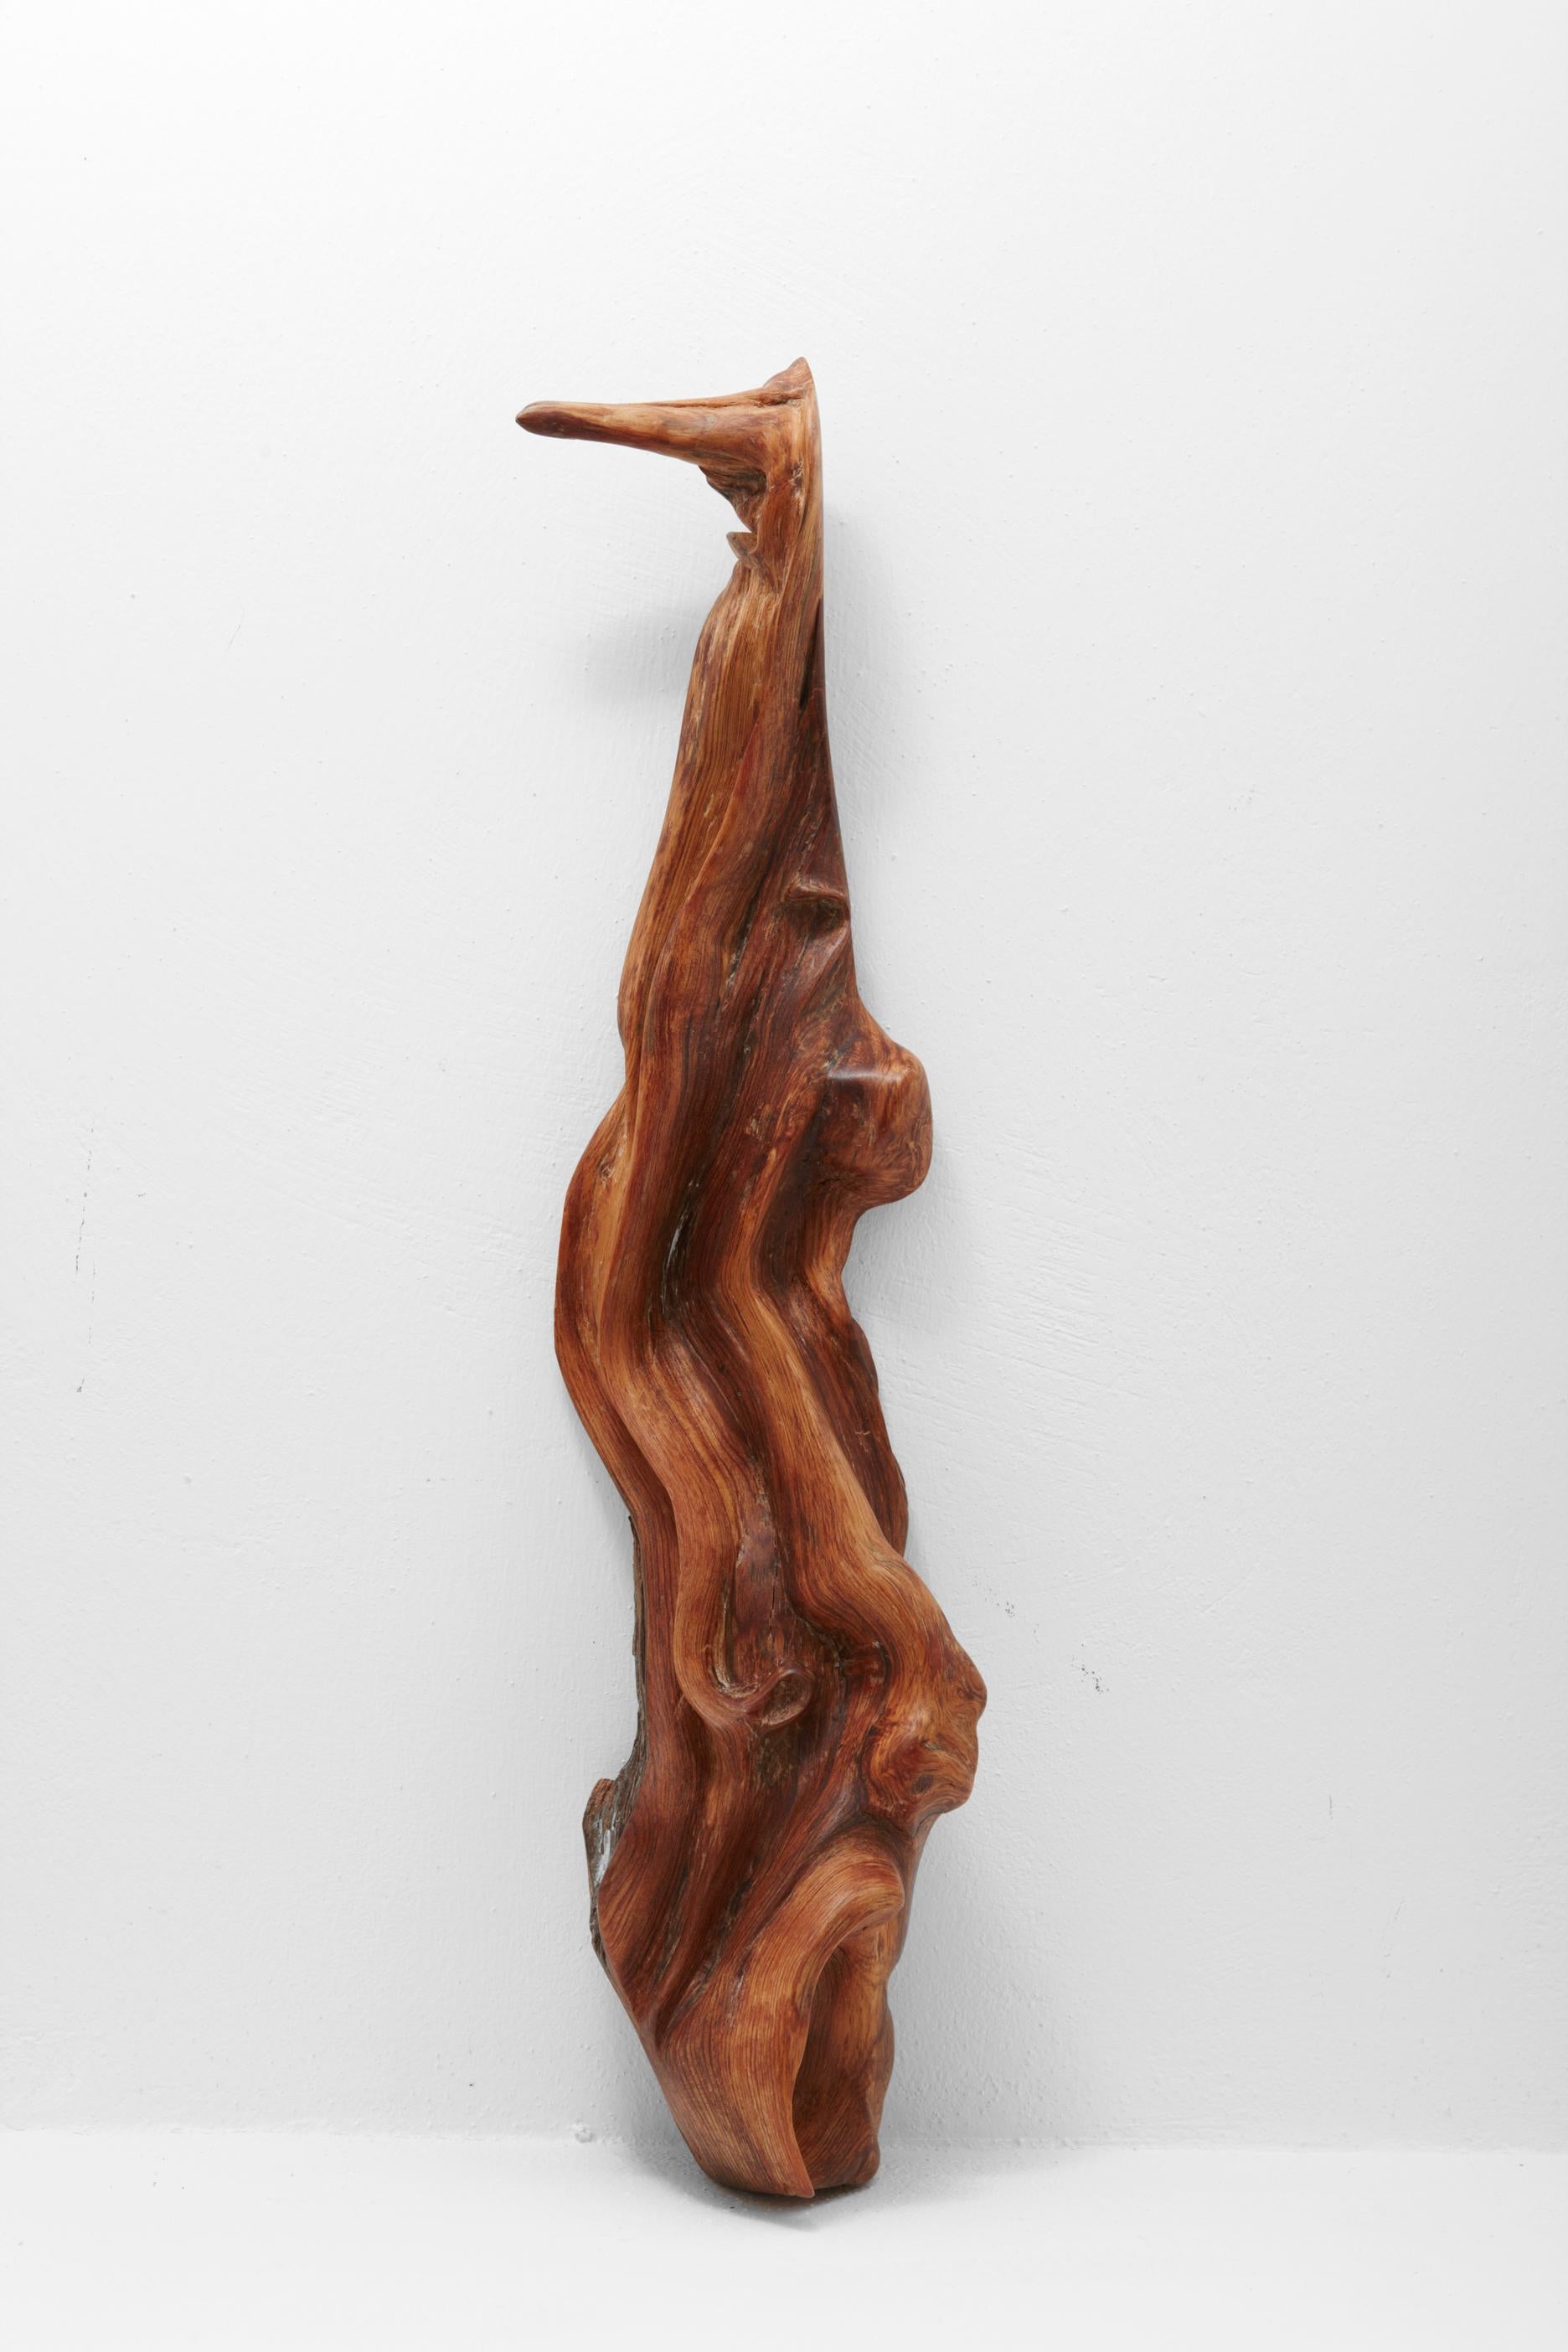 Unique olive wood sculpture signed by Jörg Pietschmann
Materials: Olive wood
Measures: H 14 x W 63 x D 13 cm

In Pietschmann’s sculptures, trees that for centuries were part of a landscape and founded in primordial forces tell stories inscribed